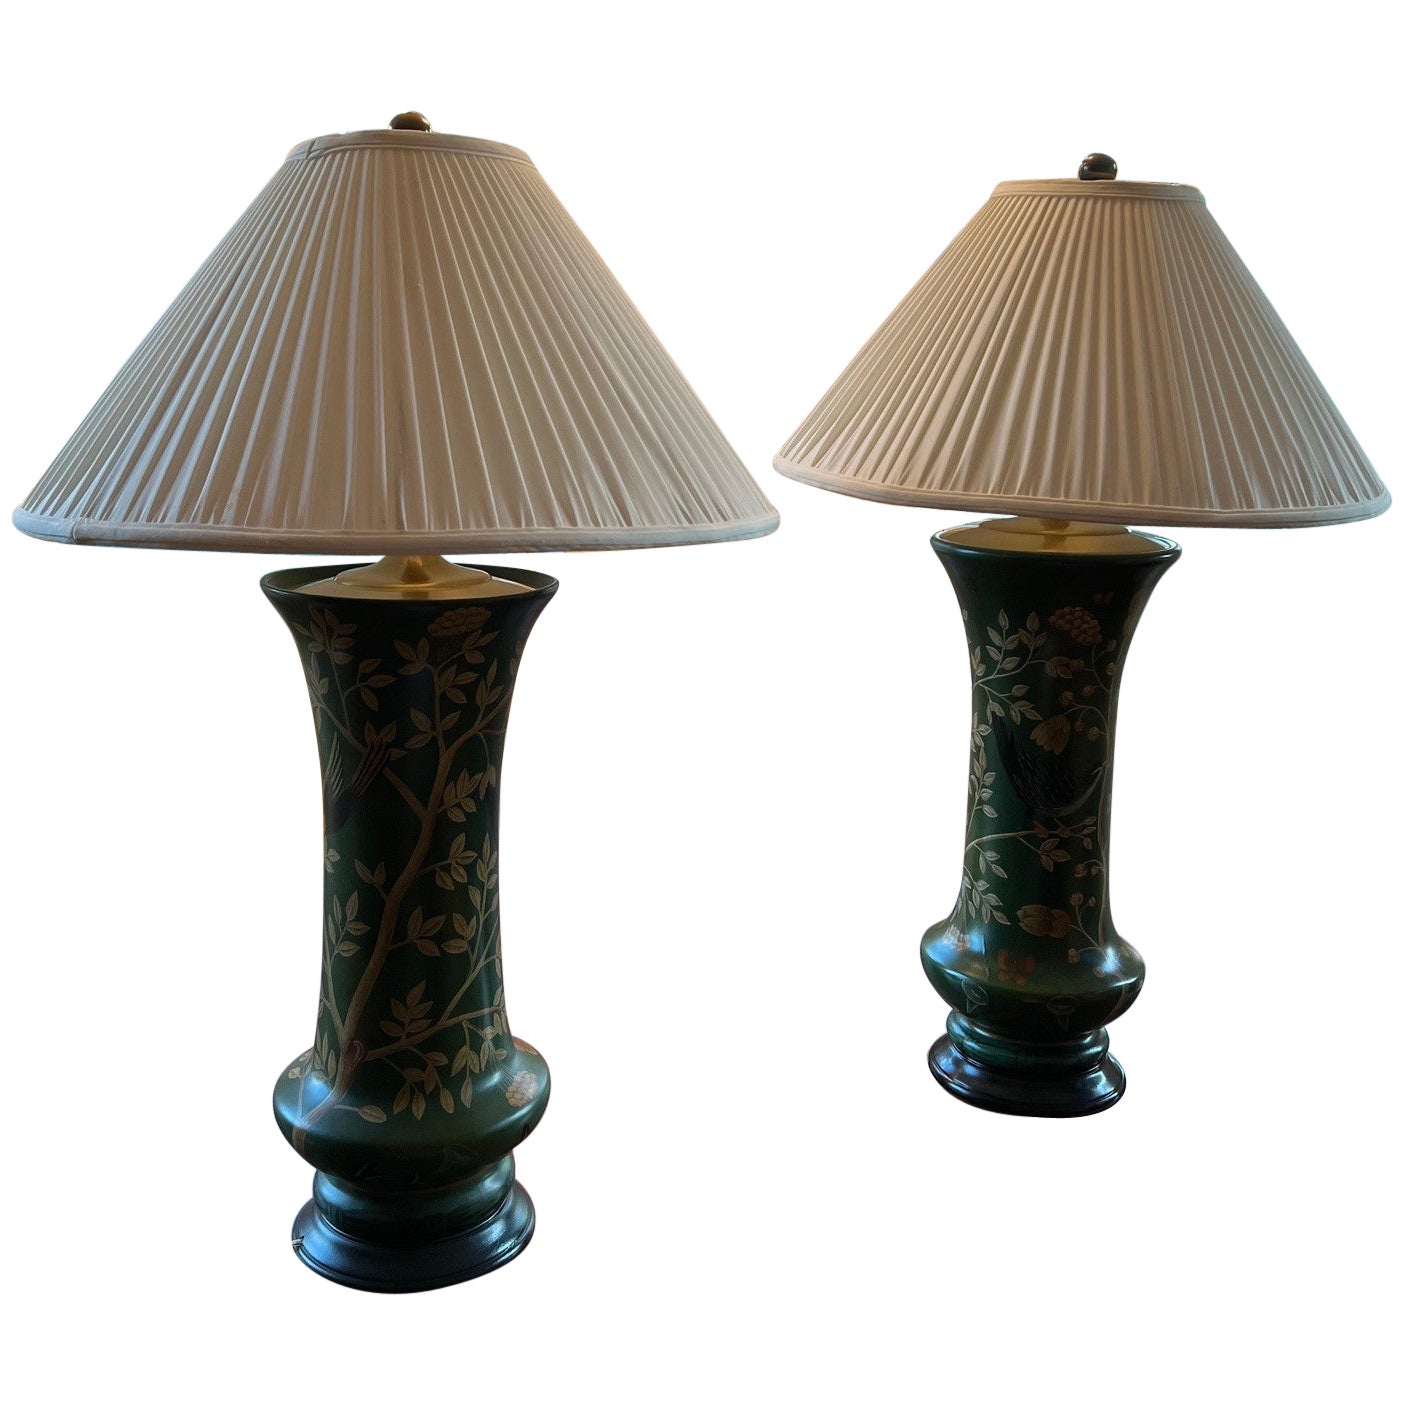 Near Pair of Hand Painted Asian Style Table Lamps - Schumacher Furnishings For Sale